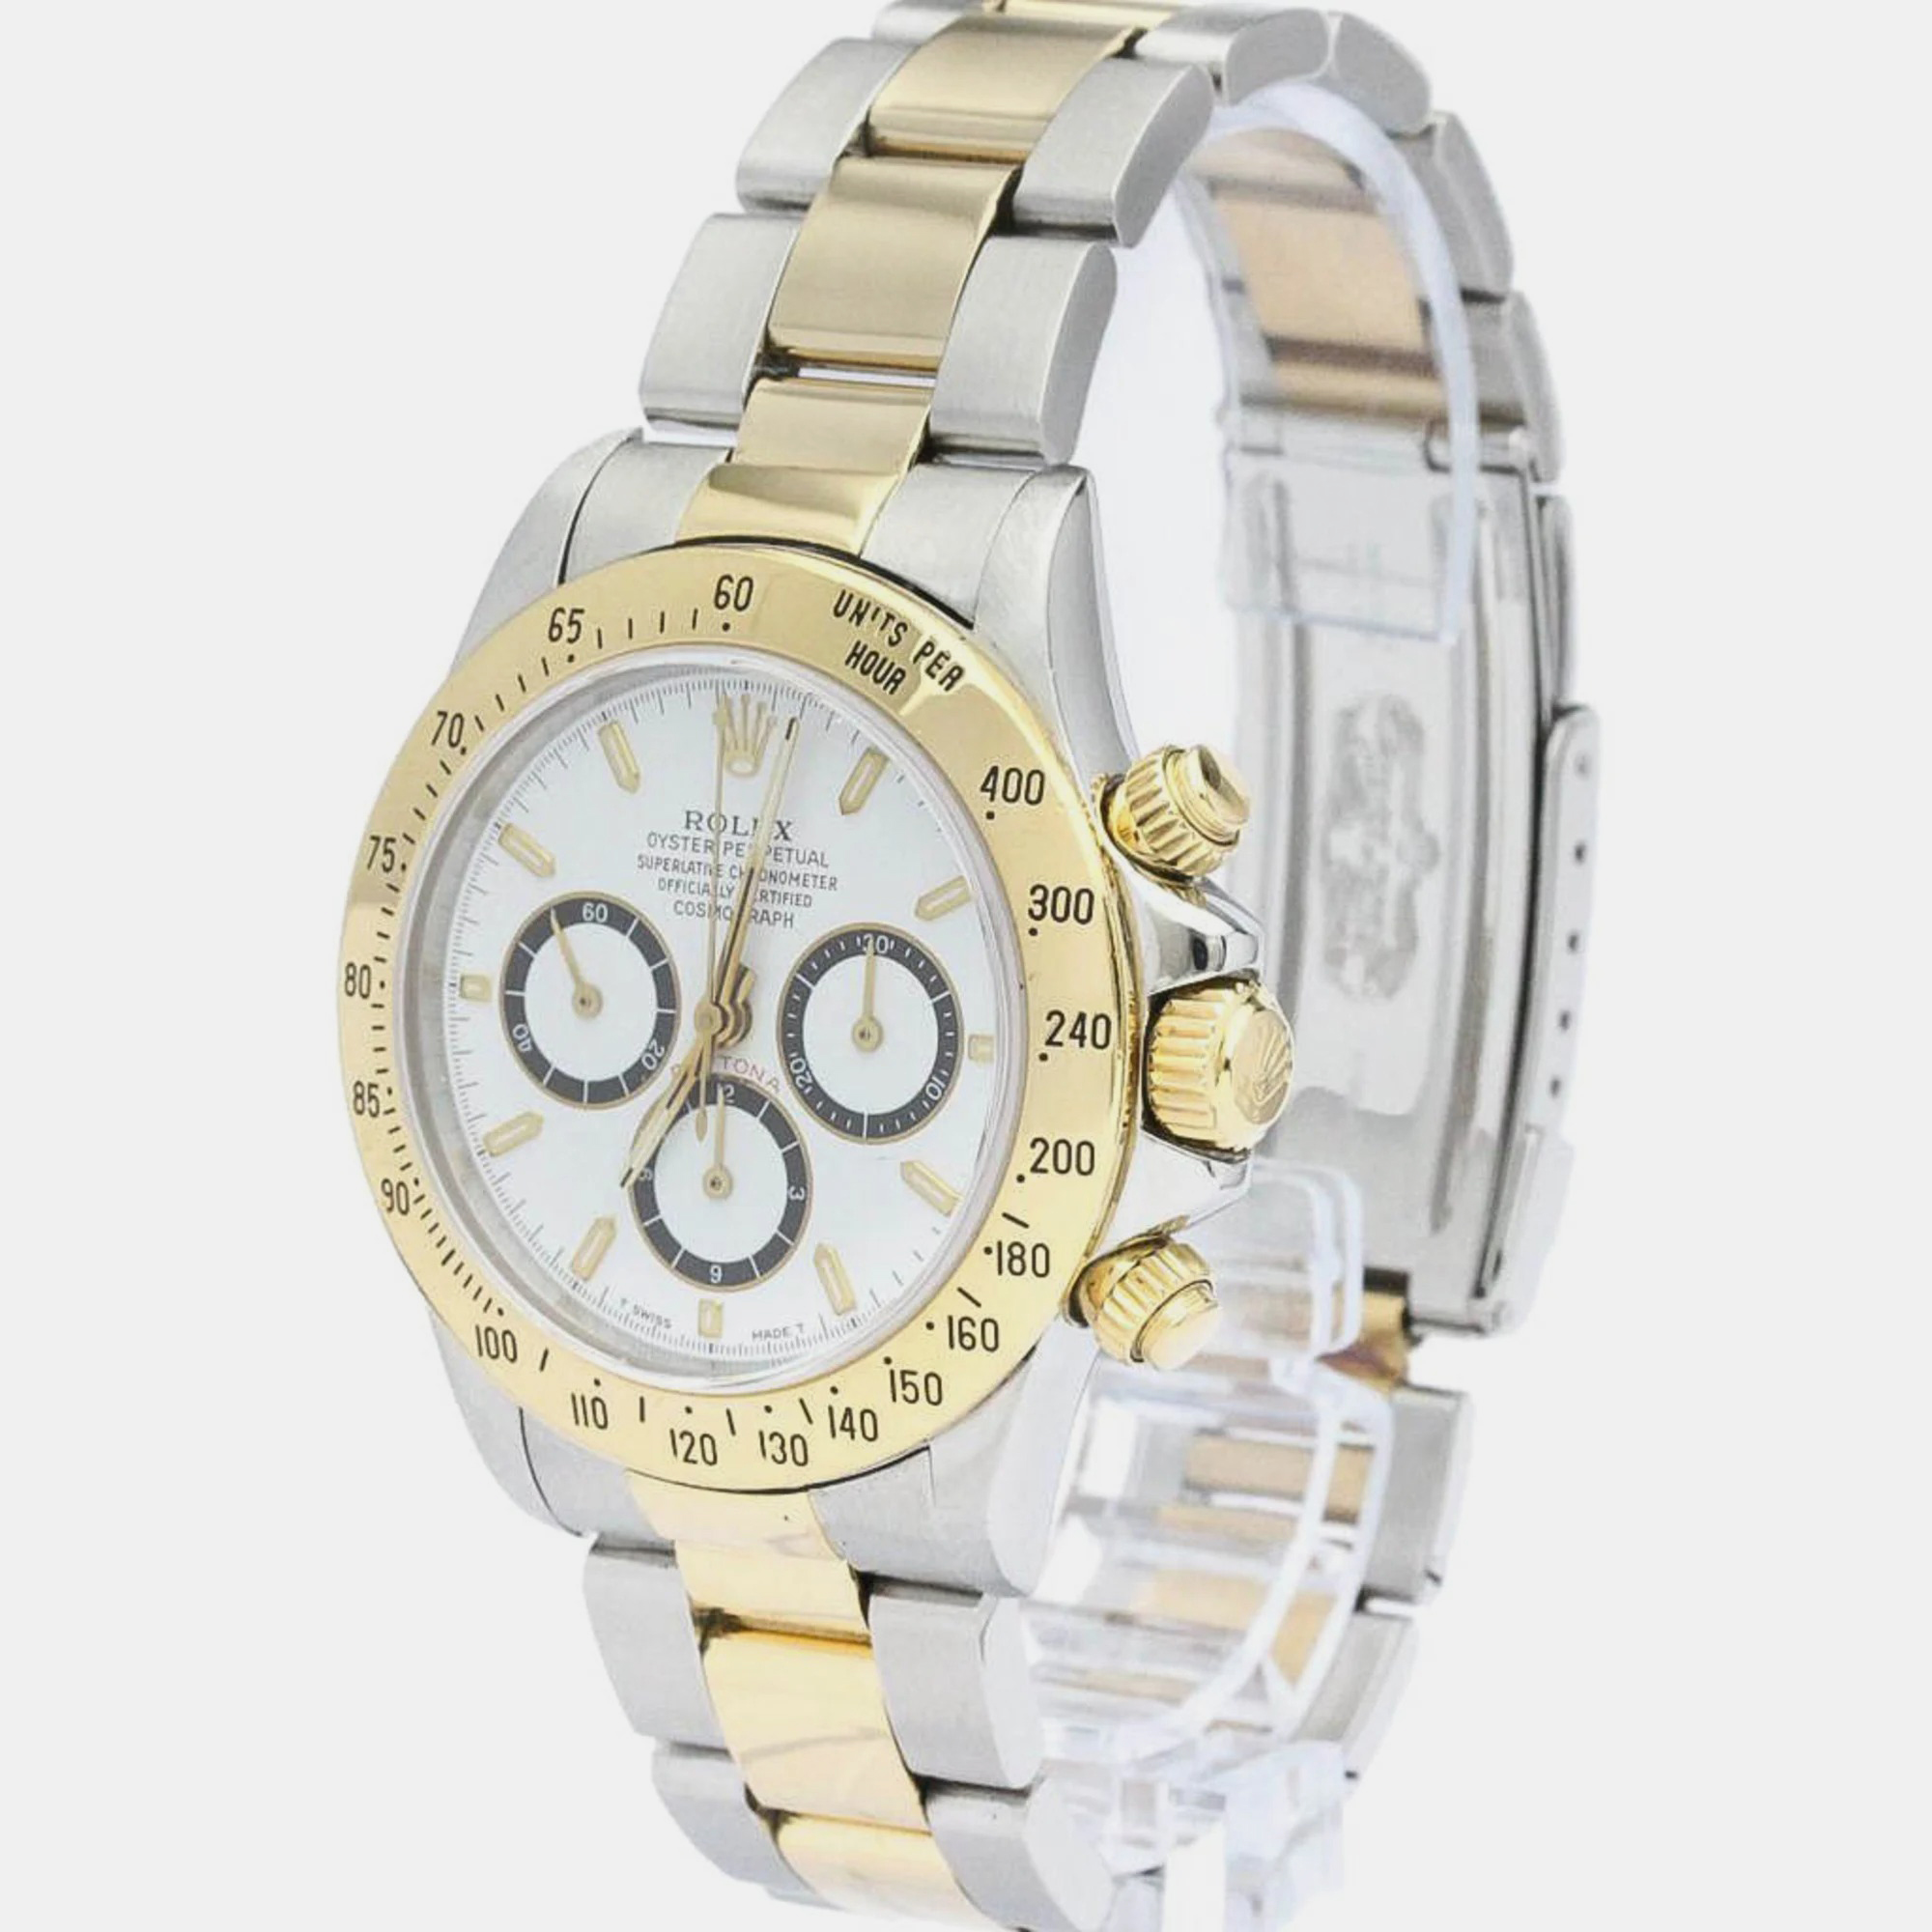 

Rolex White 18k Yellow Gold And Stainless Steel Cosmograph Daytona 16523 Automatic Men's Wristwatch 40 mm